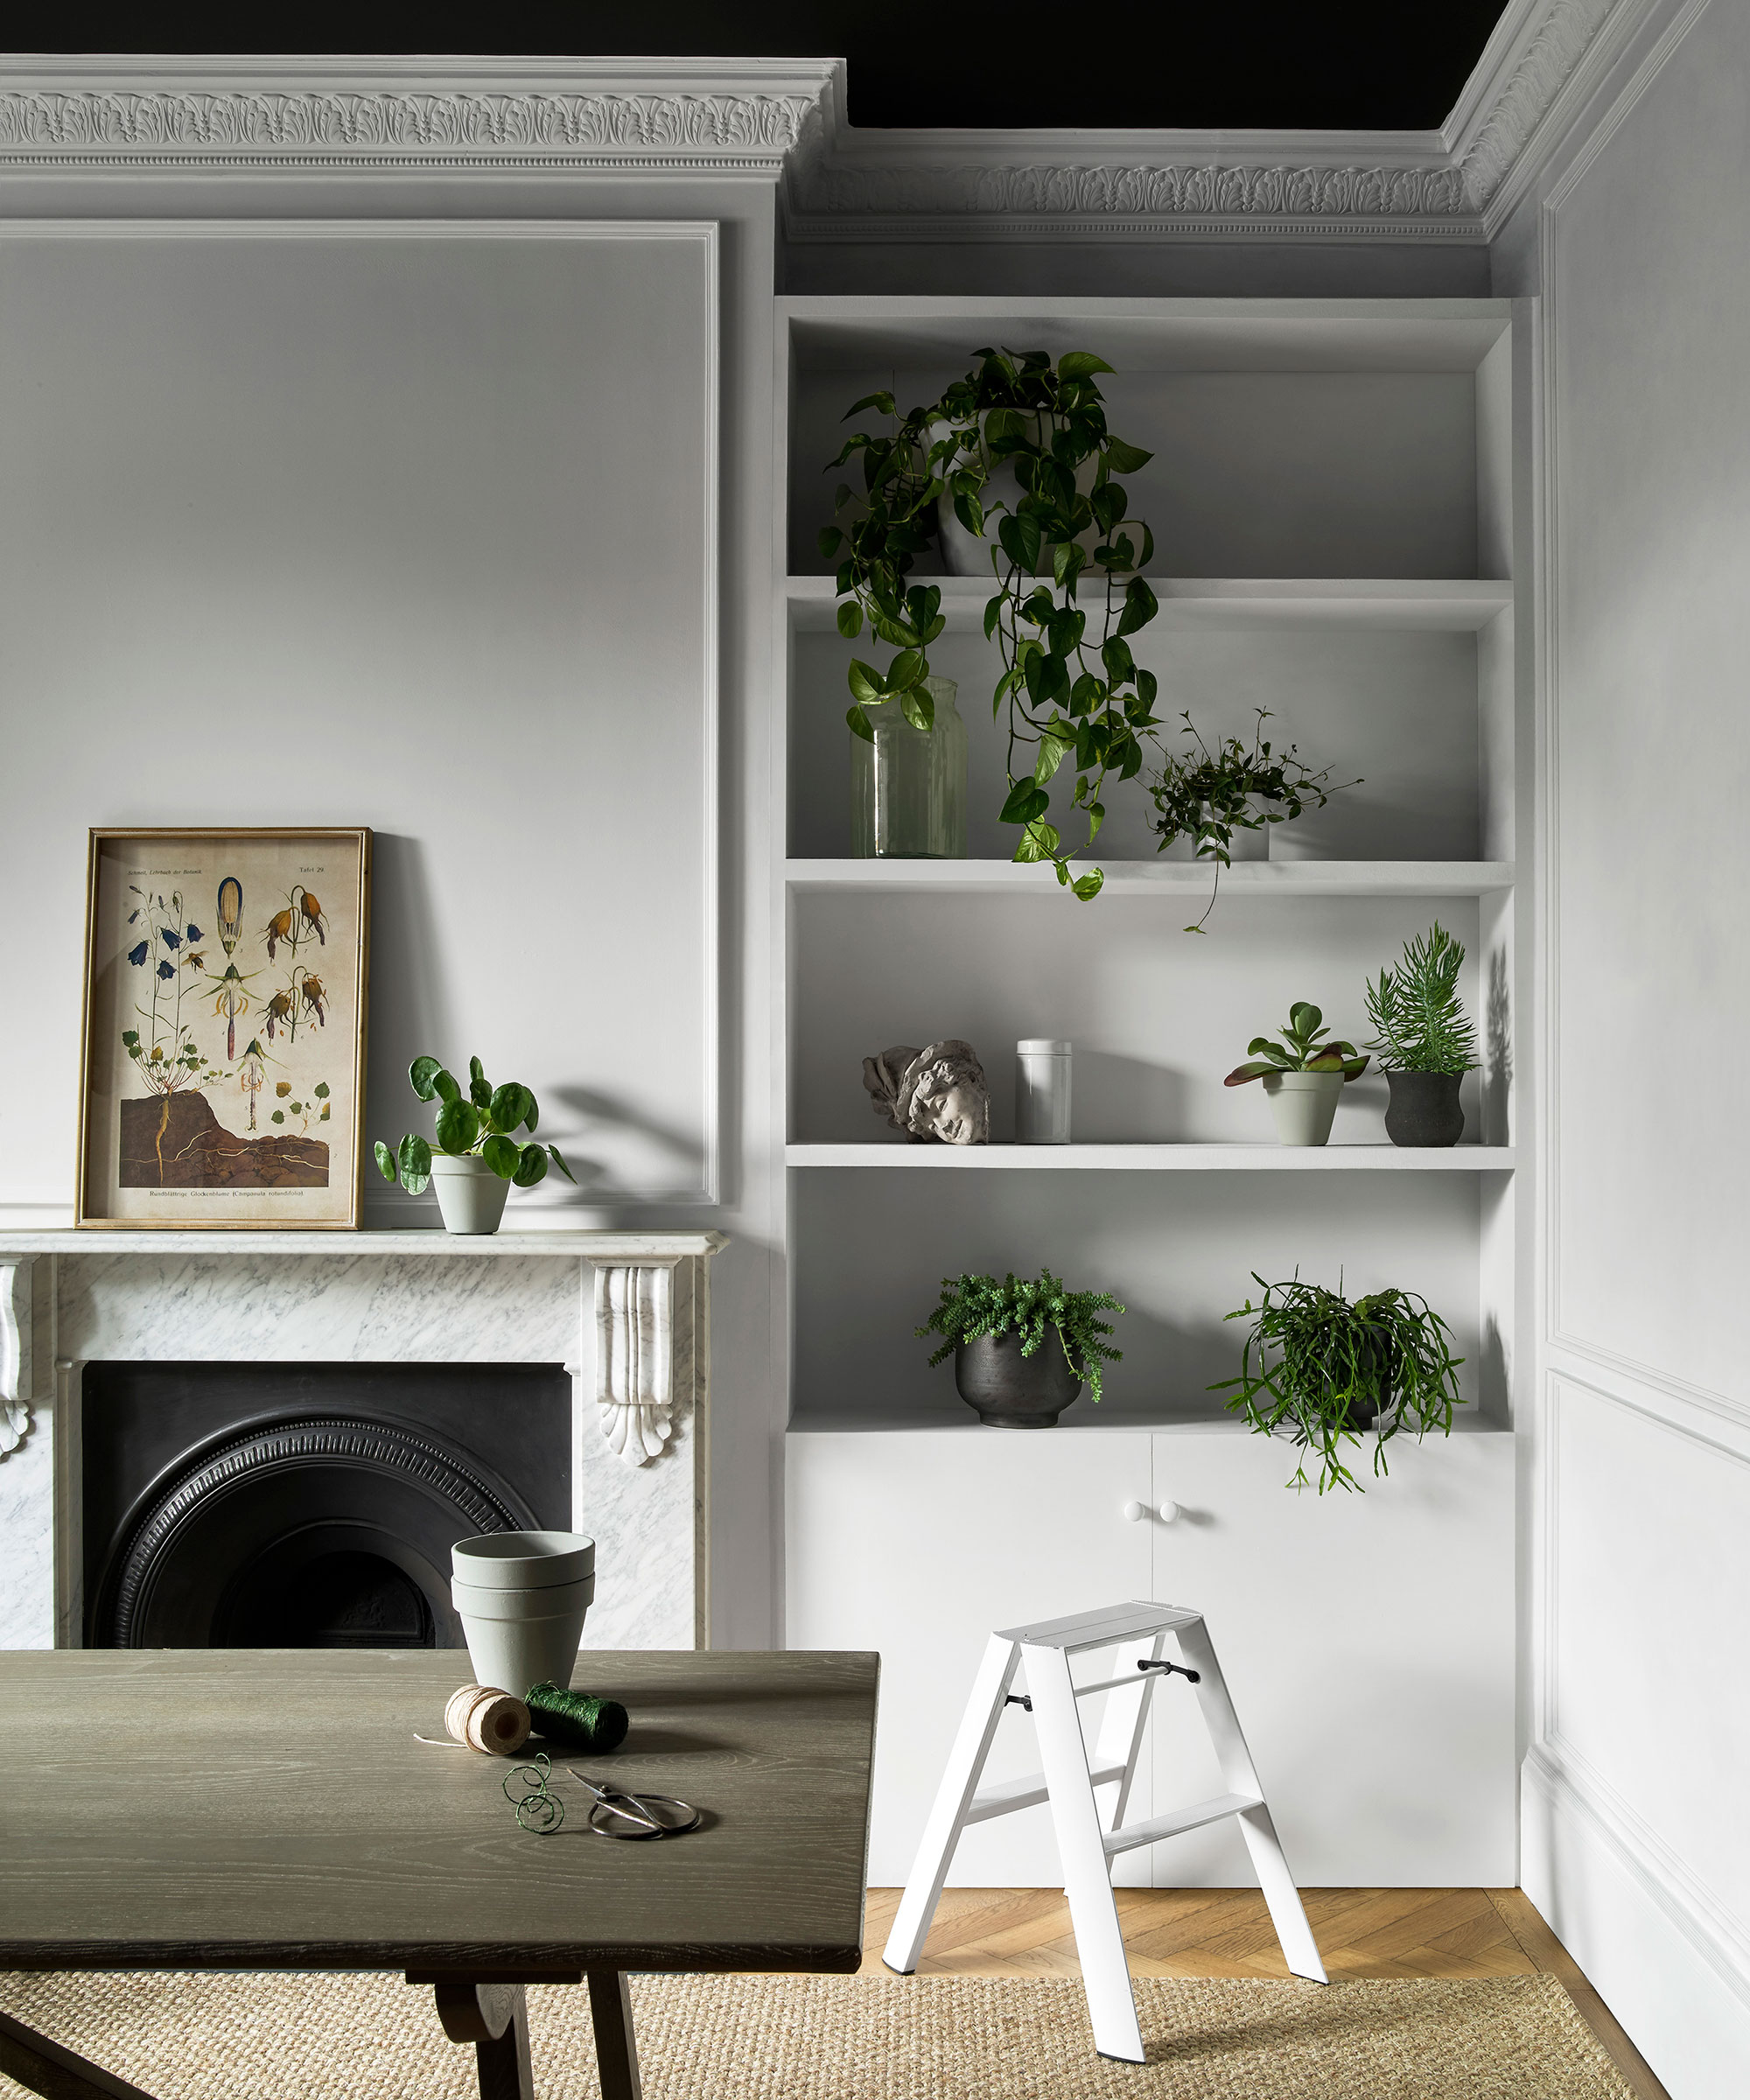 White painted dining room with shelves built in alcove and cornicing details on coving